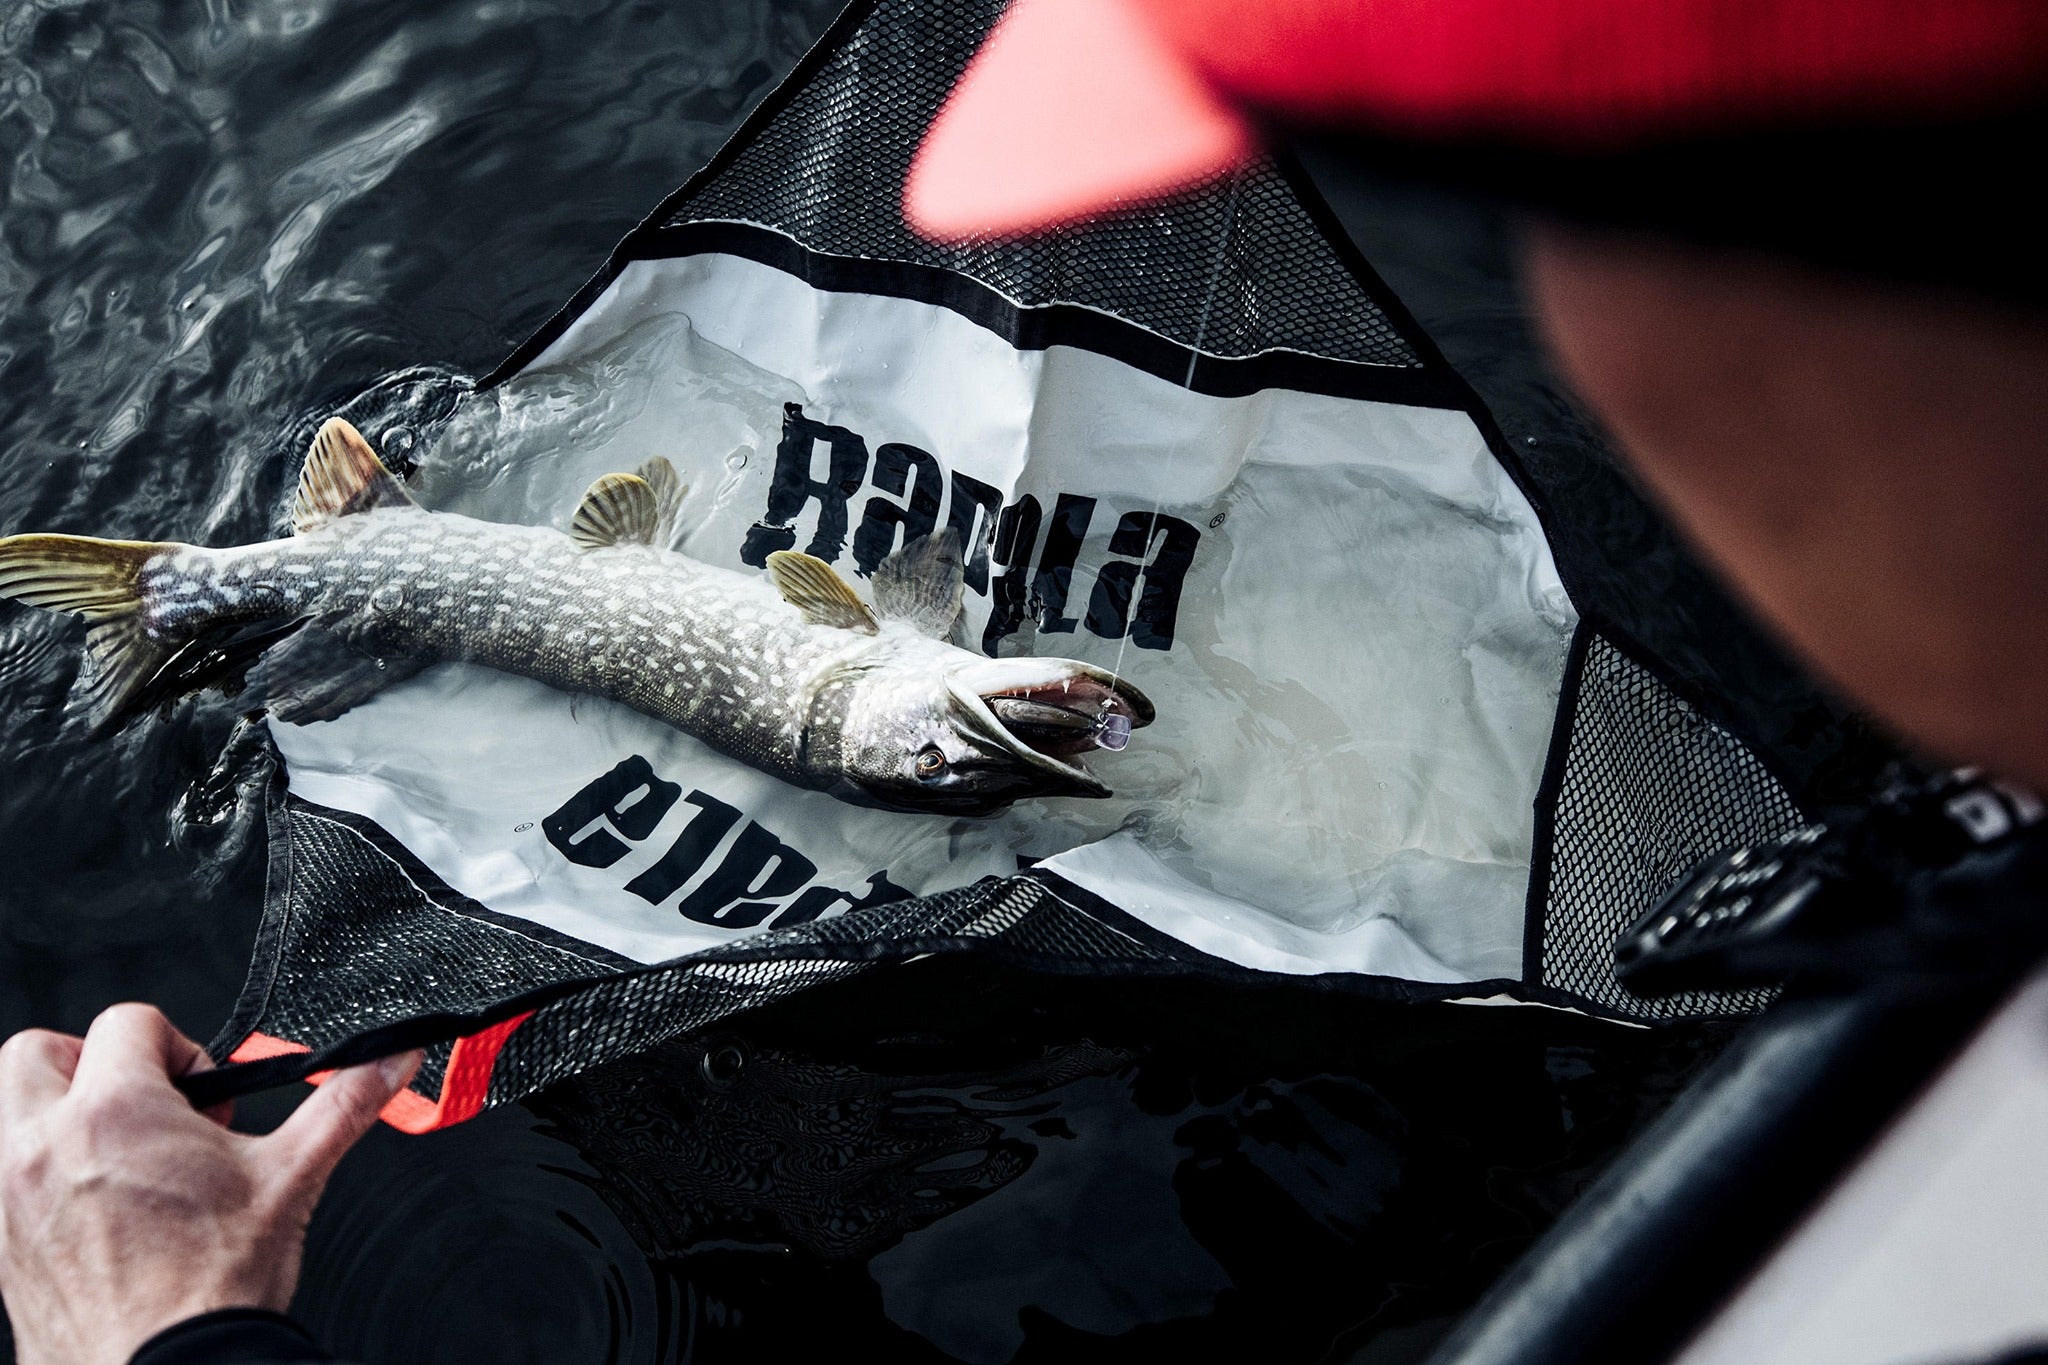 Rapala Fishing Fish Weigh and Release Mat